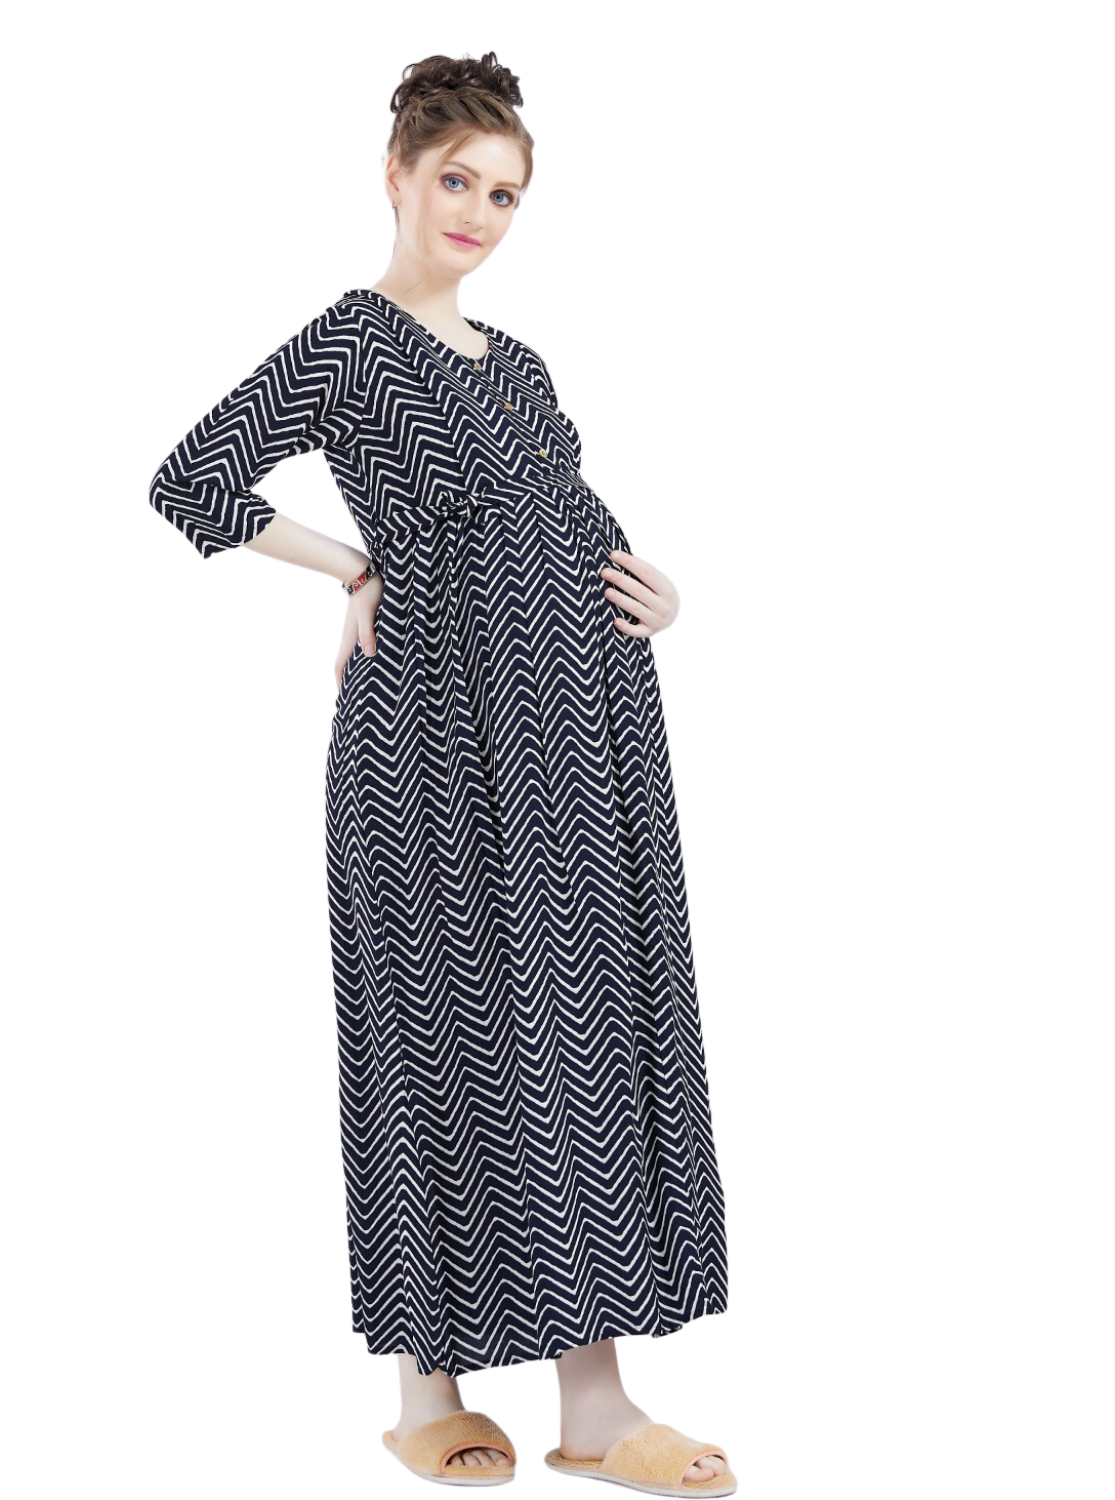 New ONLY MINE 4-IN-ONE Mom's Wear - Soft & Smooth Rayon | Maternity | Feeding | Maxi | Long Frock | Casual Wear